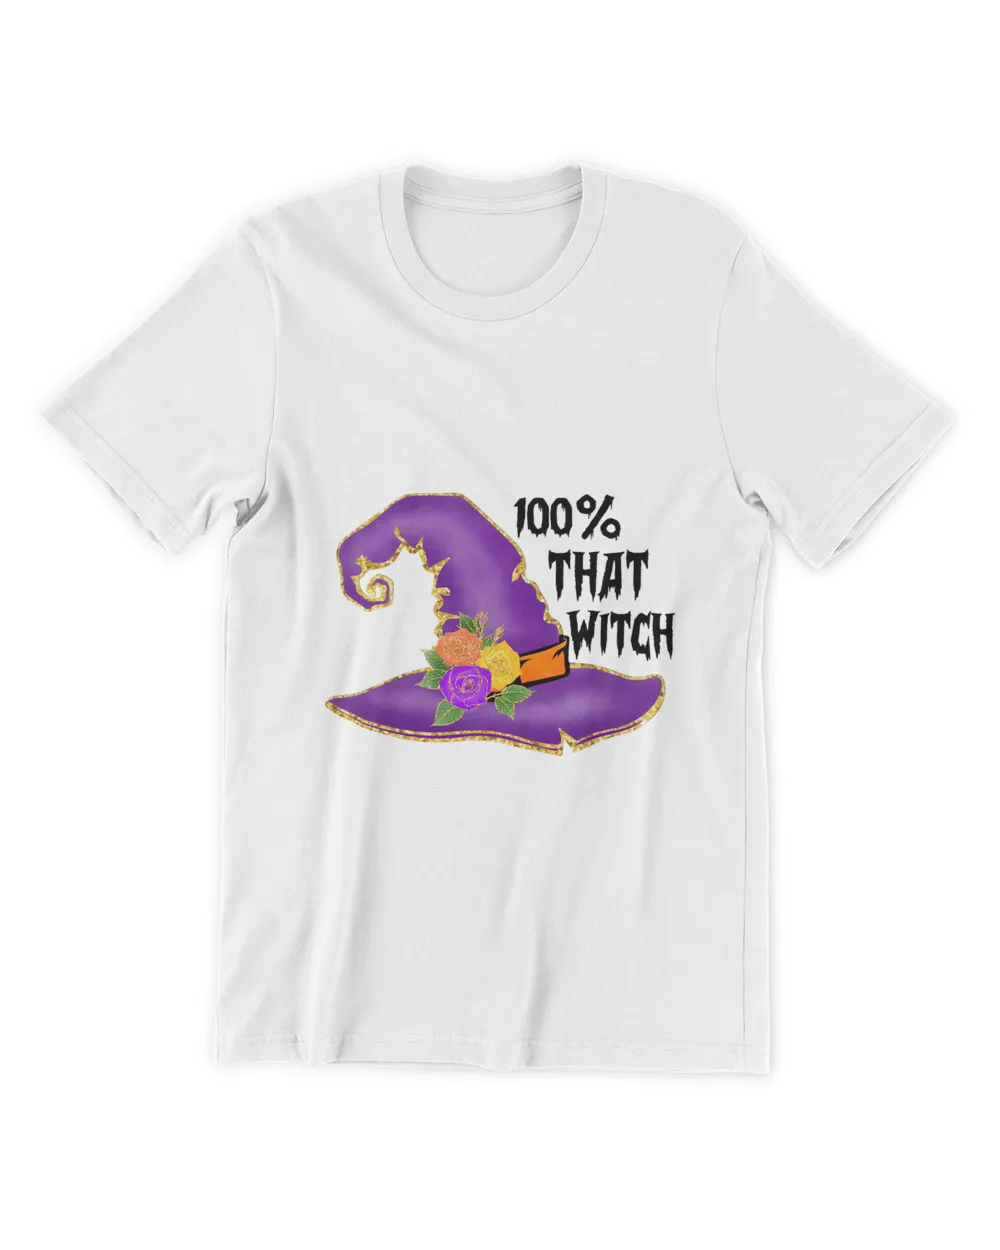 100% That Witch Shirts